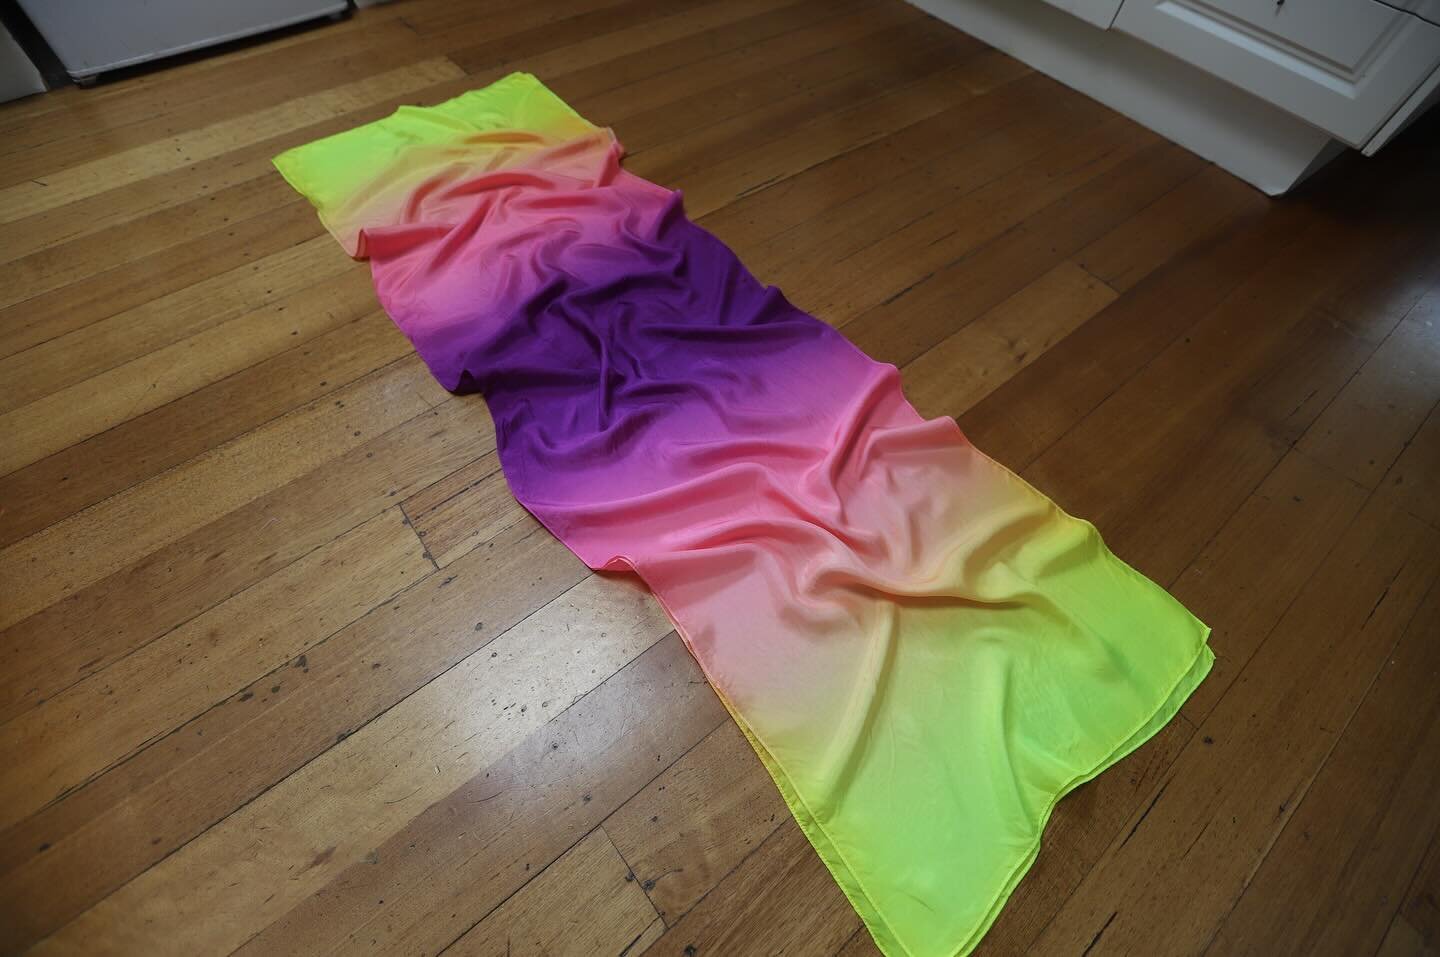 These 20 x 70 inch veils for poi are available and ready to ship! $140 AUD + GST per set. Some are UV reactive. For more details head over to my online shop ✨ 

🔗 you know where to find it 

#veilpoi #veilpoidancecommunity #veilpoidance #veilpoiflow